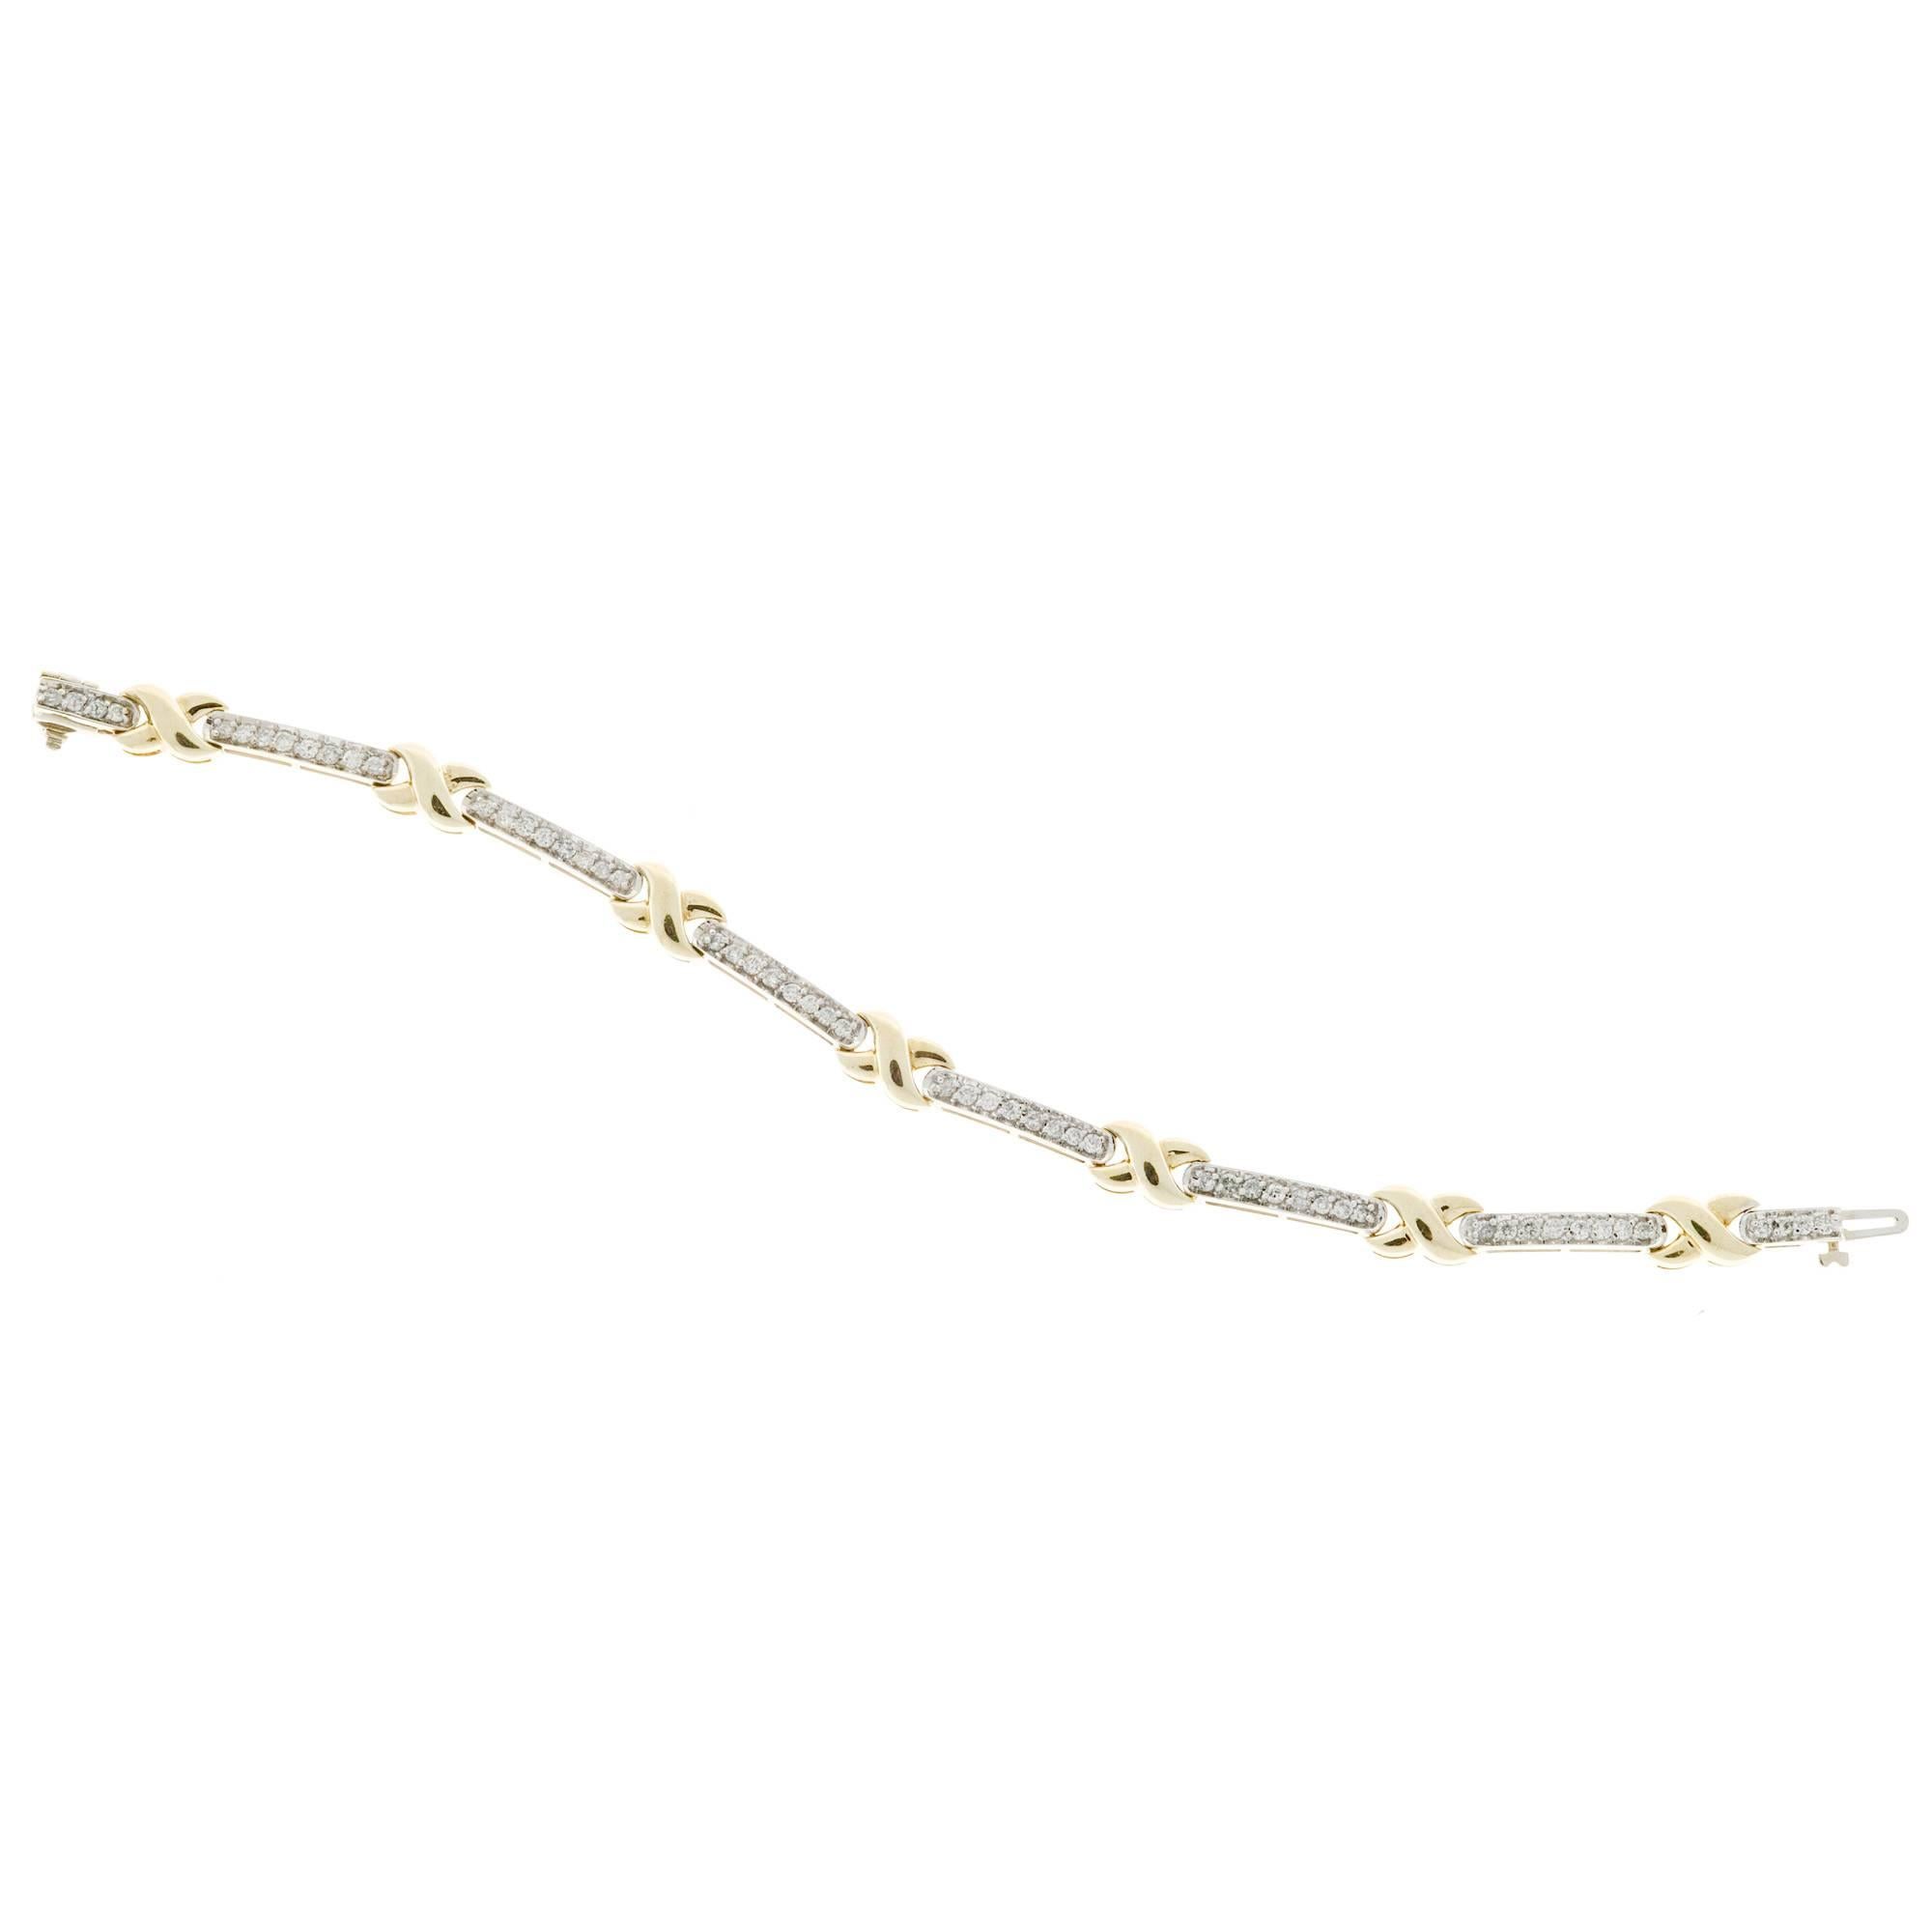 Bright and sparkly 14k white and yellow gold hinged link bracelet with full cut diamonds bead set in white gold bar links with yellow gold 